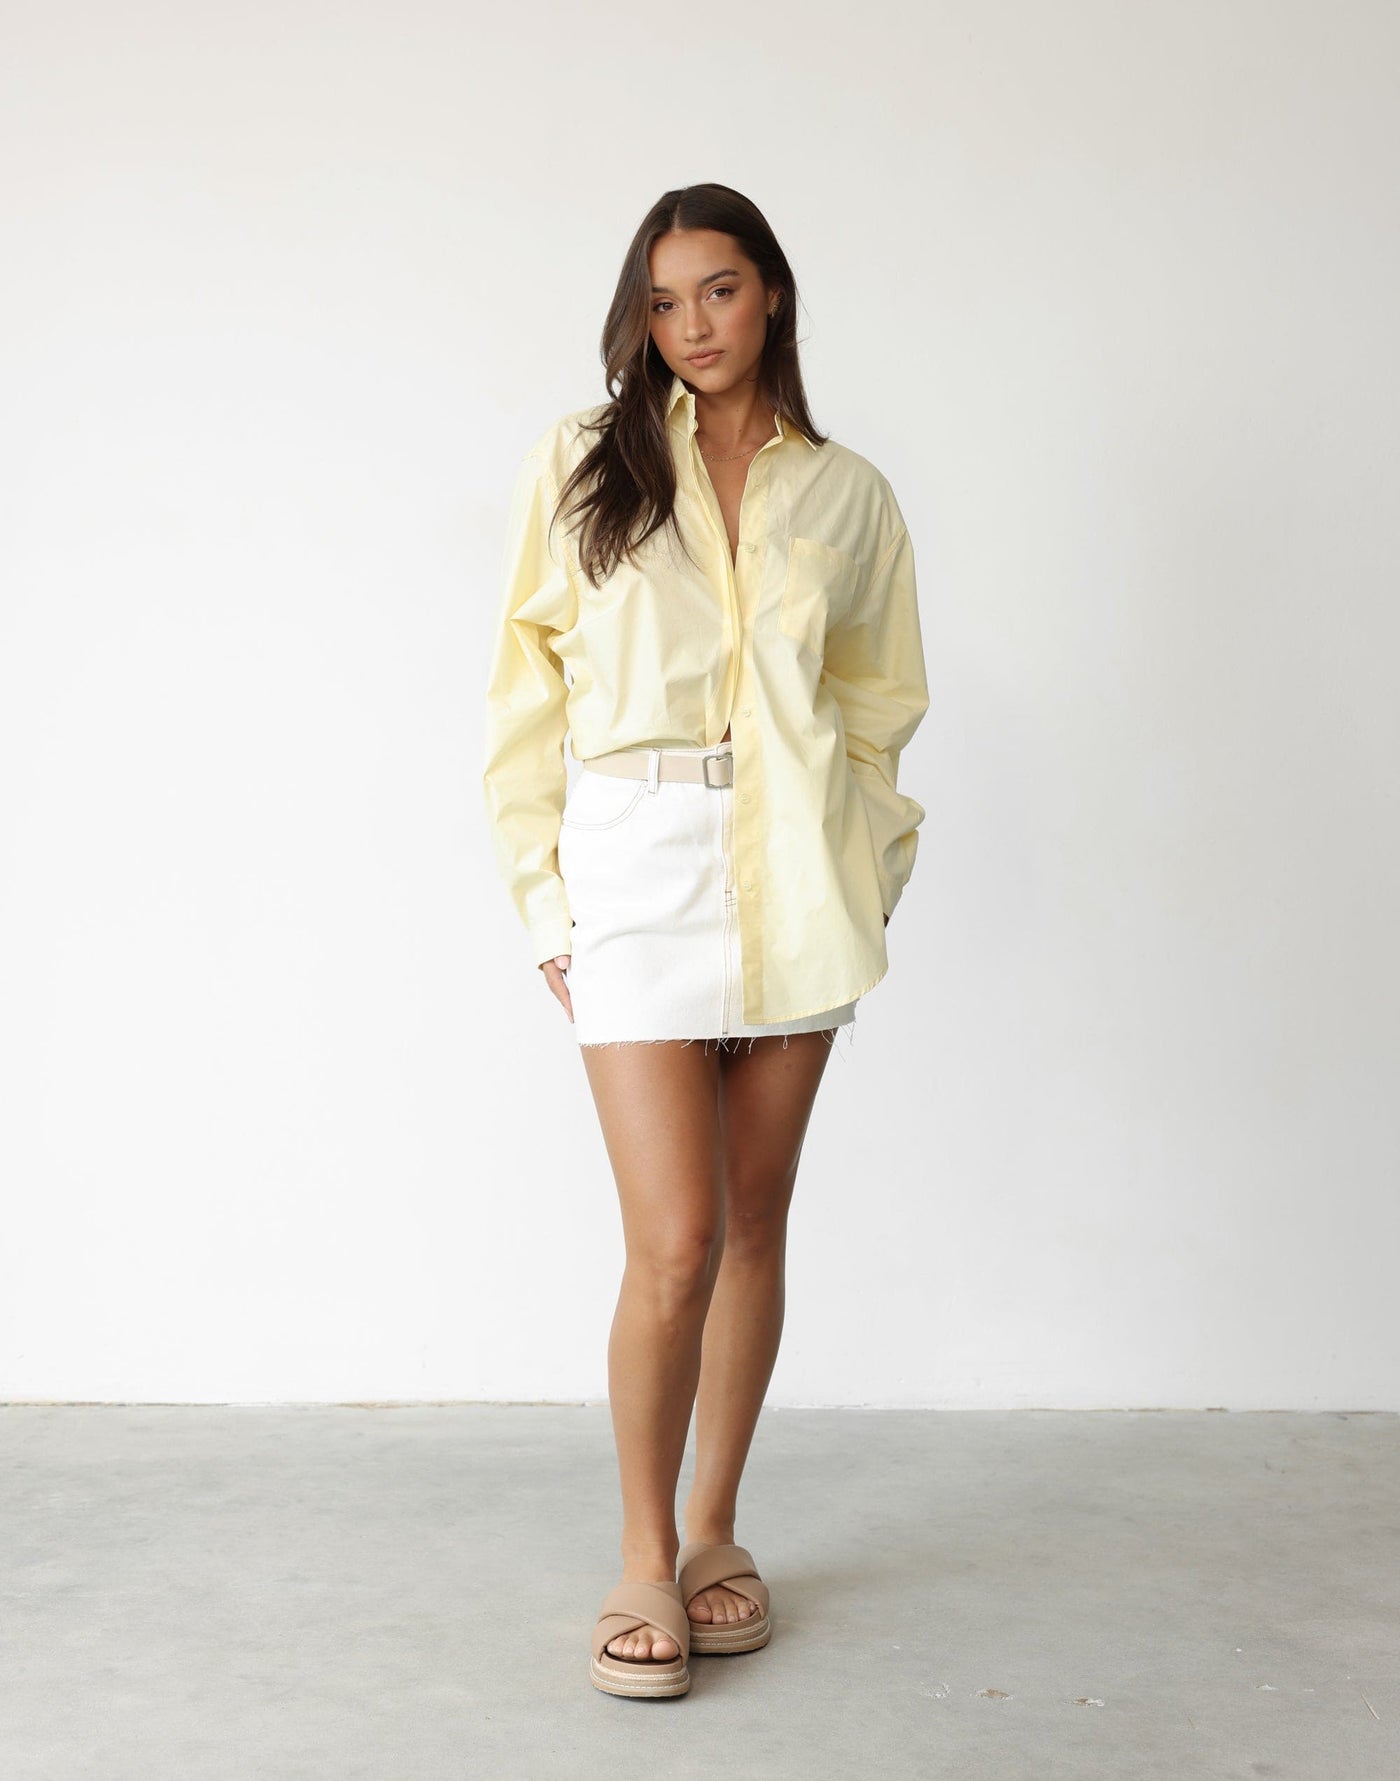 Franco Shirt (Lemon) | Charcoal Clothing Exclusive - Oversized Long Sleeve Collared Neckline Button Up - Women's Top - Charcoal Clothing